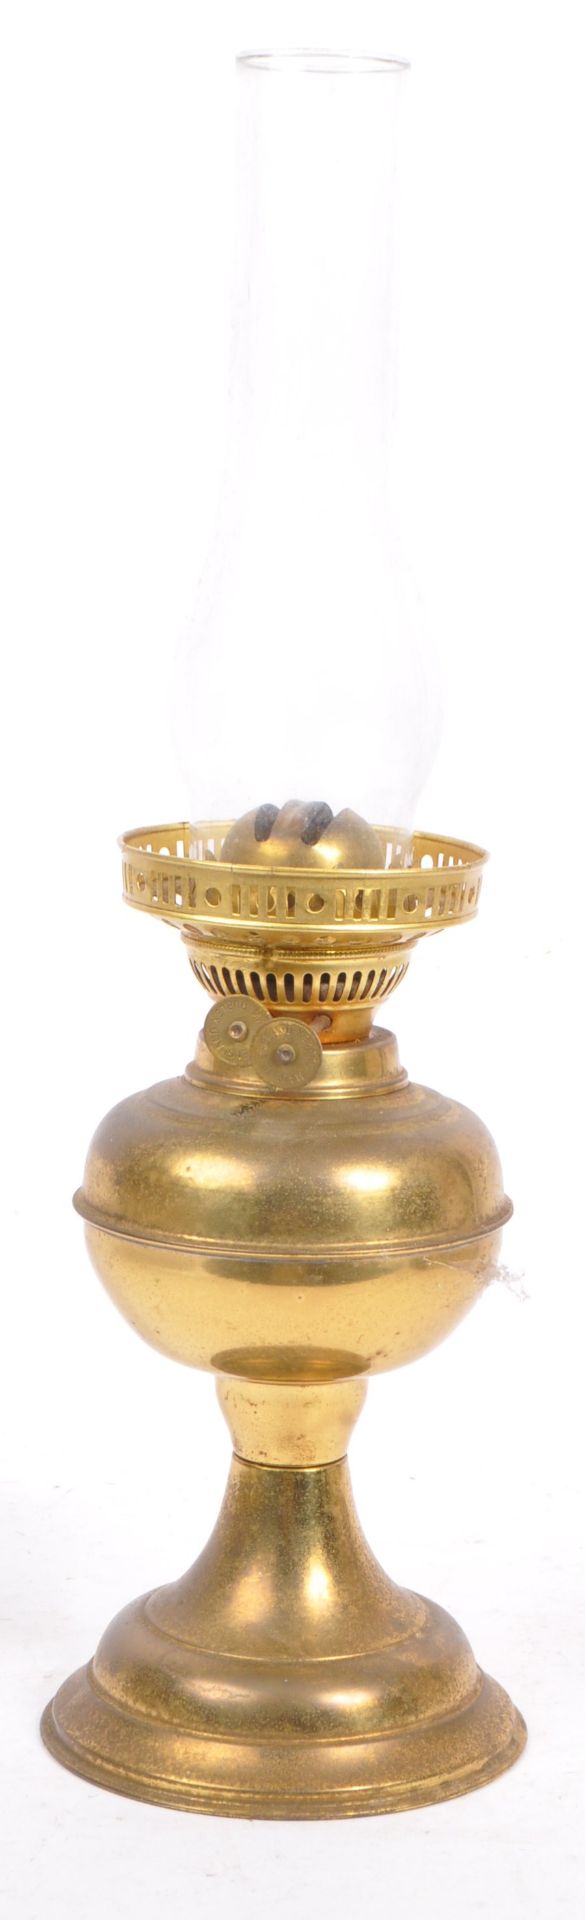 VICTORIAN 19TH CENTURY BRASS & GLASS OIL LAMP BY DUPLEX - Image 2 of 7